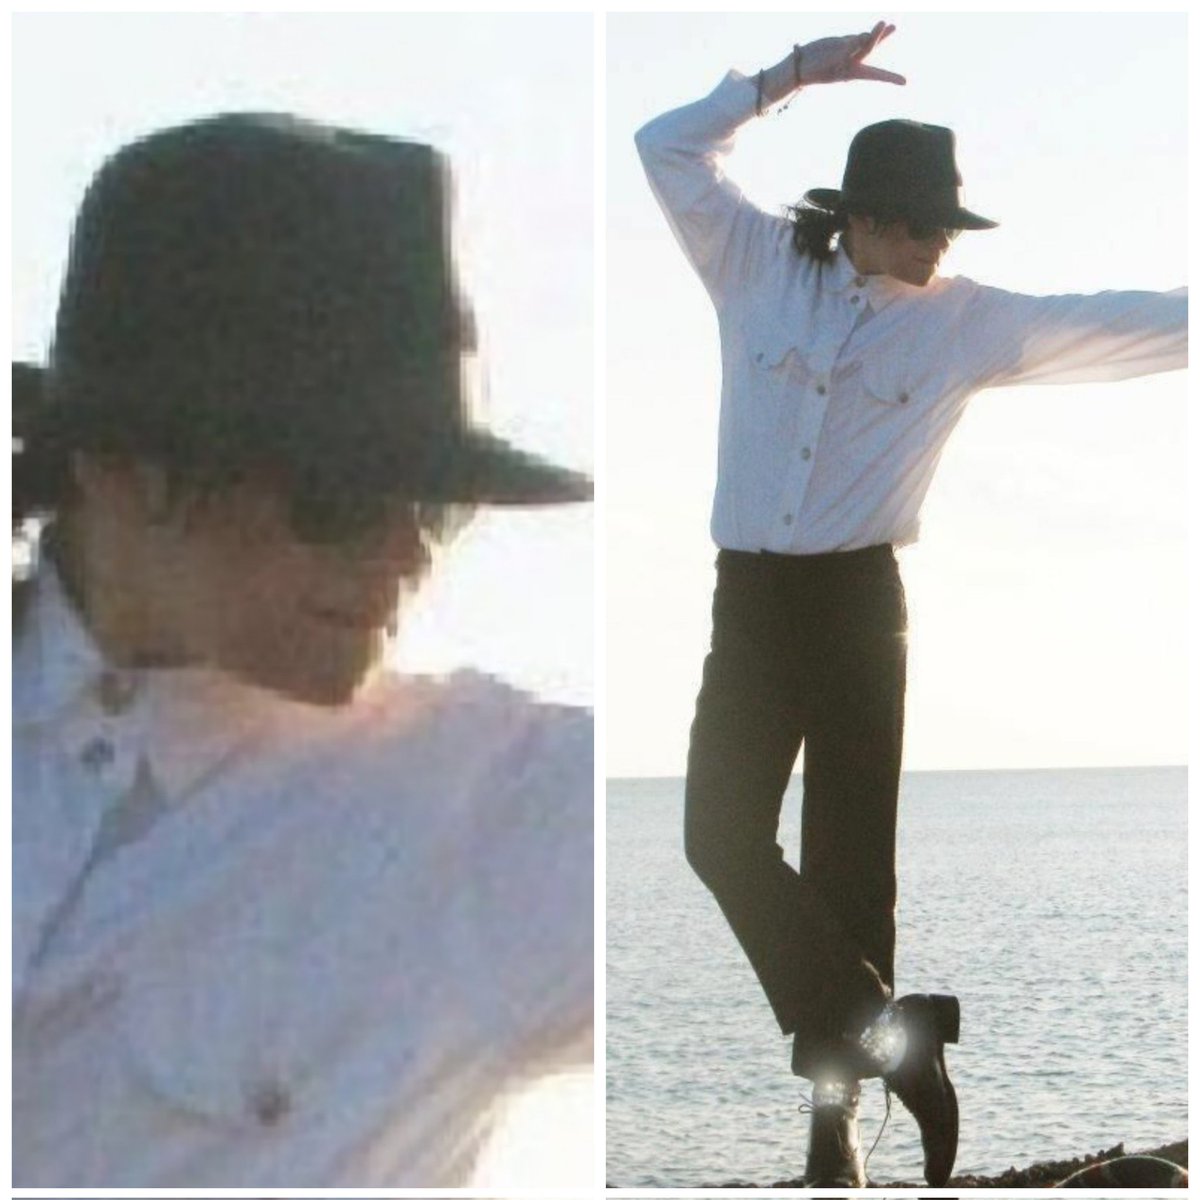 I heard so many people say 'This isn't Michael Jackson' and some say 'That's Michael Jackson' I Have to say This looks like him a lot, if this is an impersonator put him in the biopic. #MichaelJackson #KingOfPop